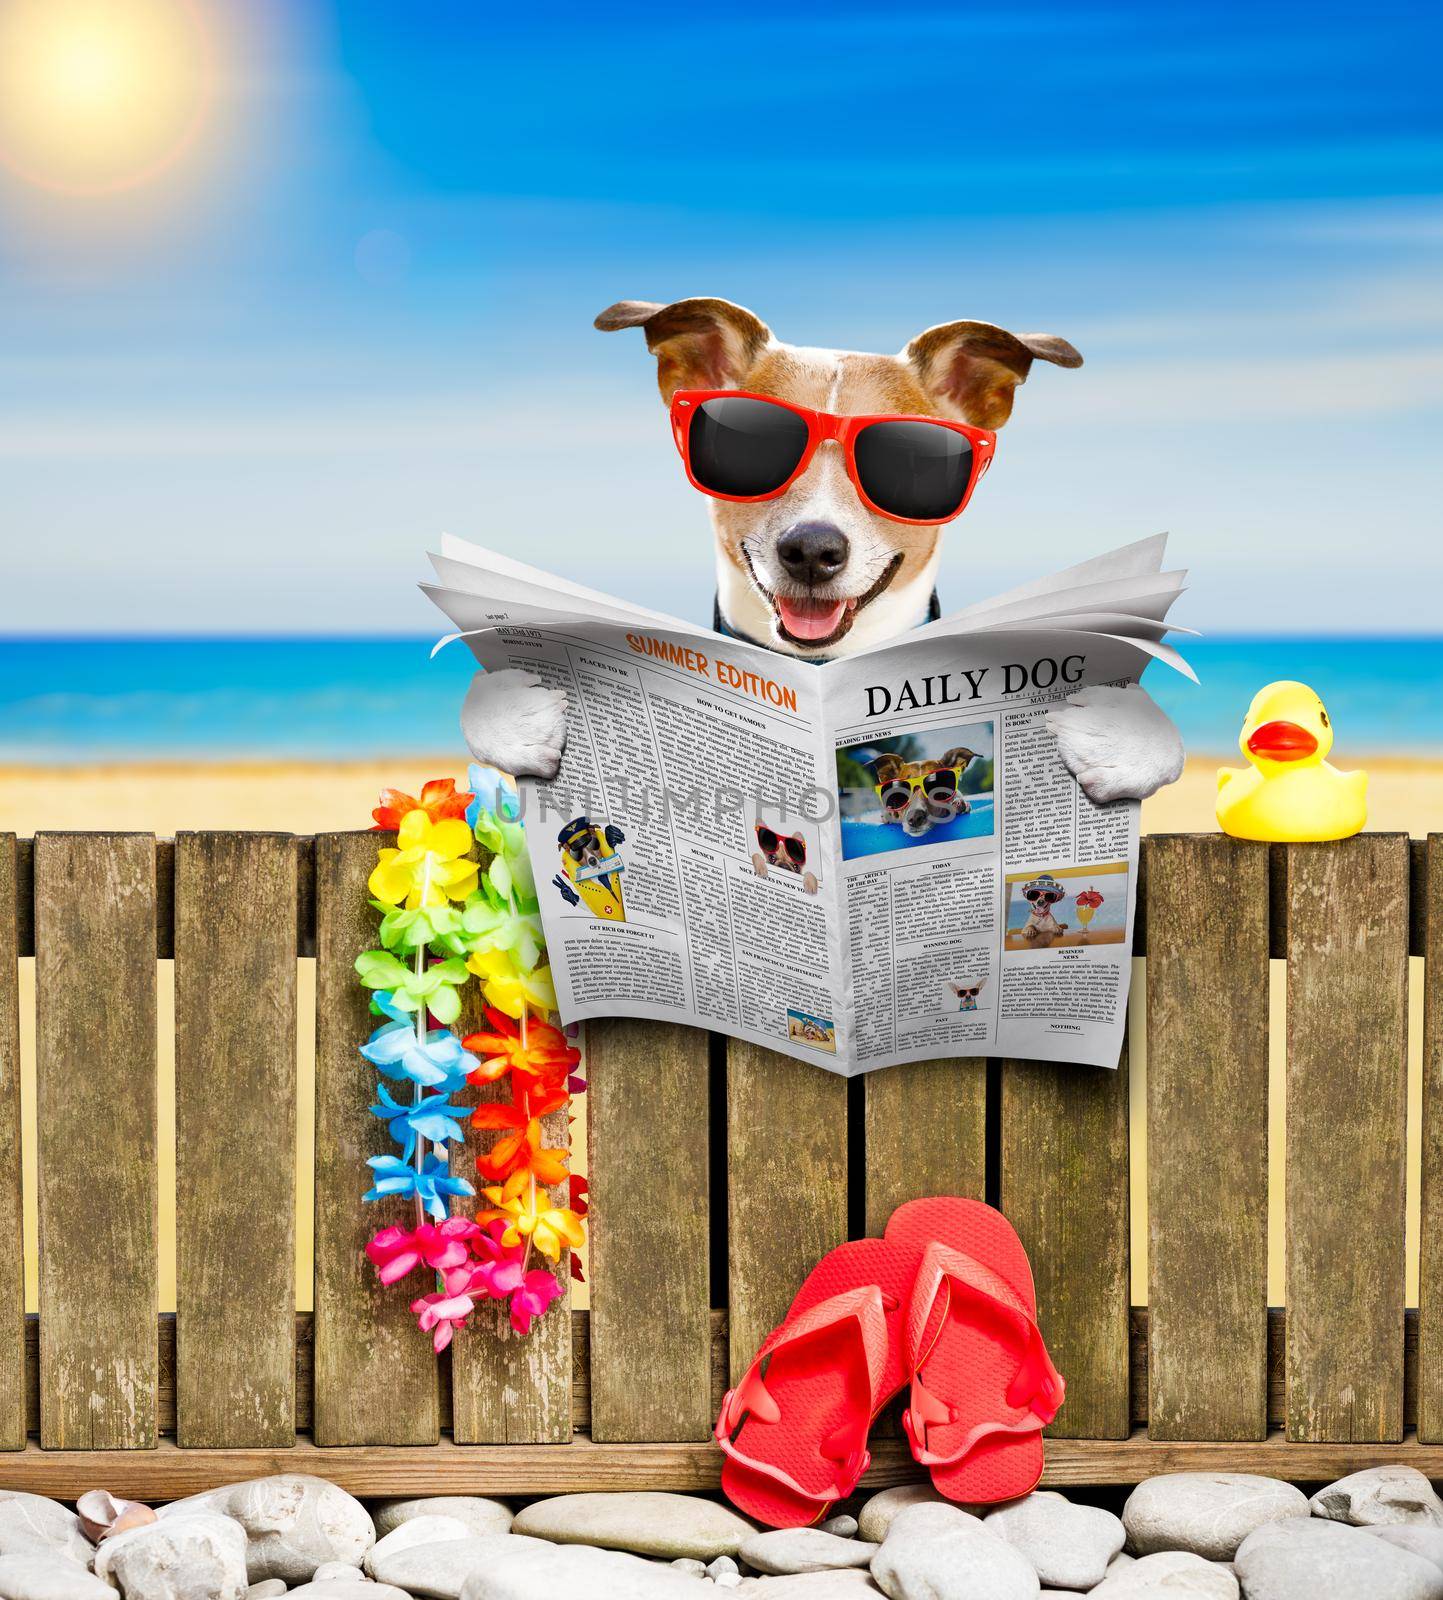 jack russel dog resting and relaxing on a wall or fence at the  beach  ocean shore, on summer vacation holidays, reading a magazine or newspaper